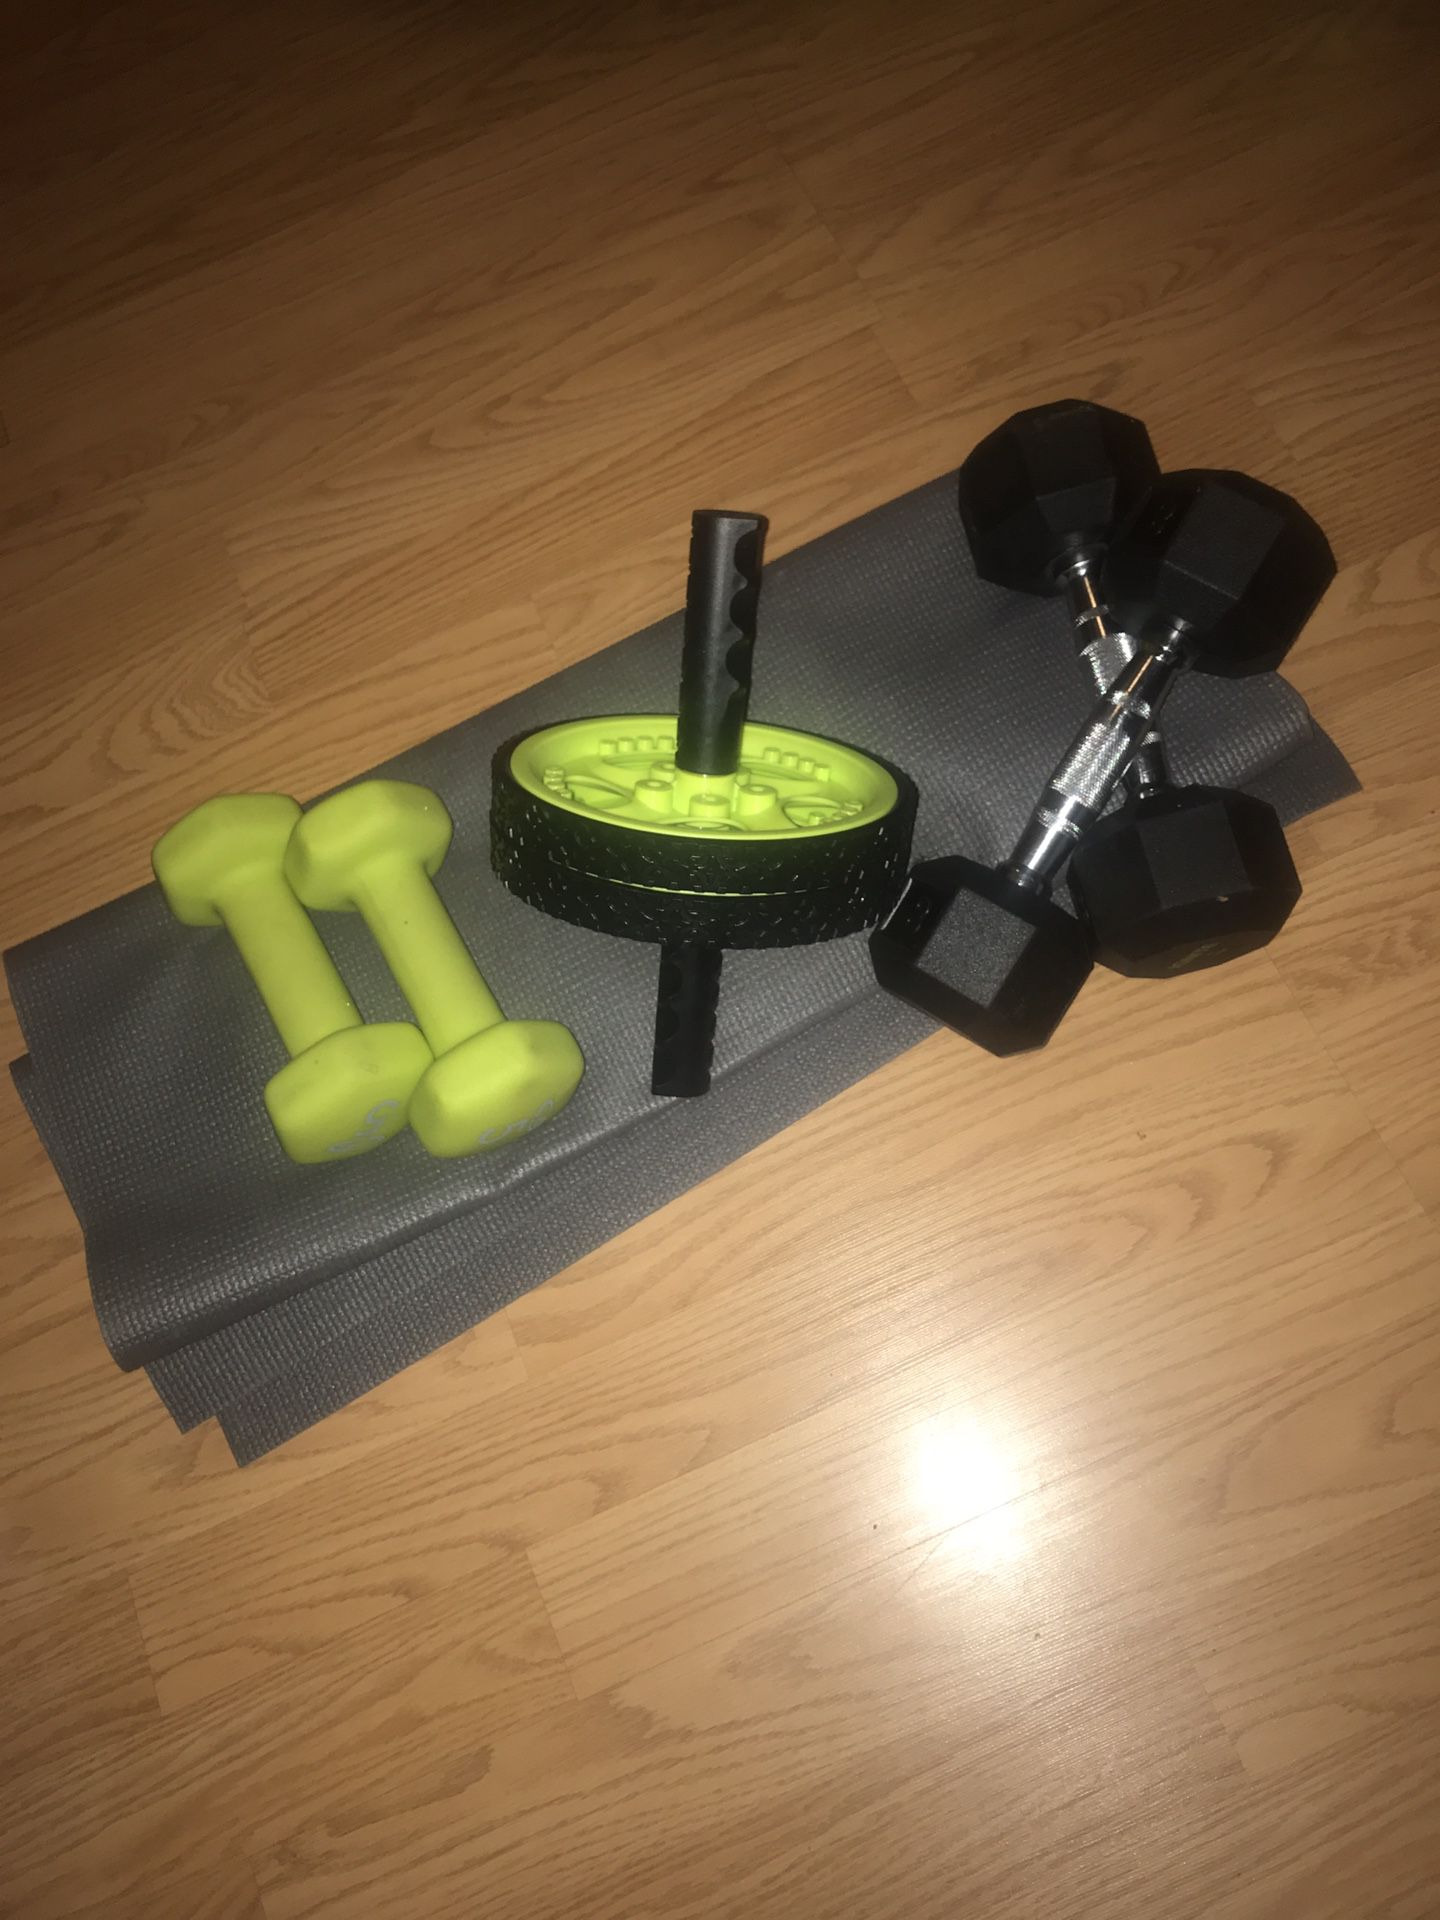 At Home Workout Equipment